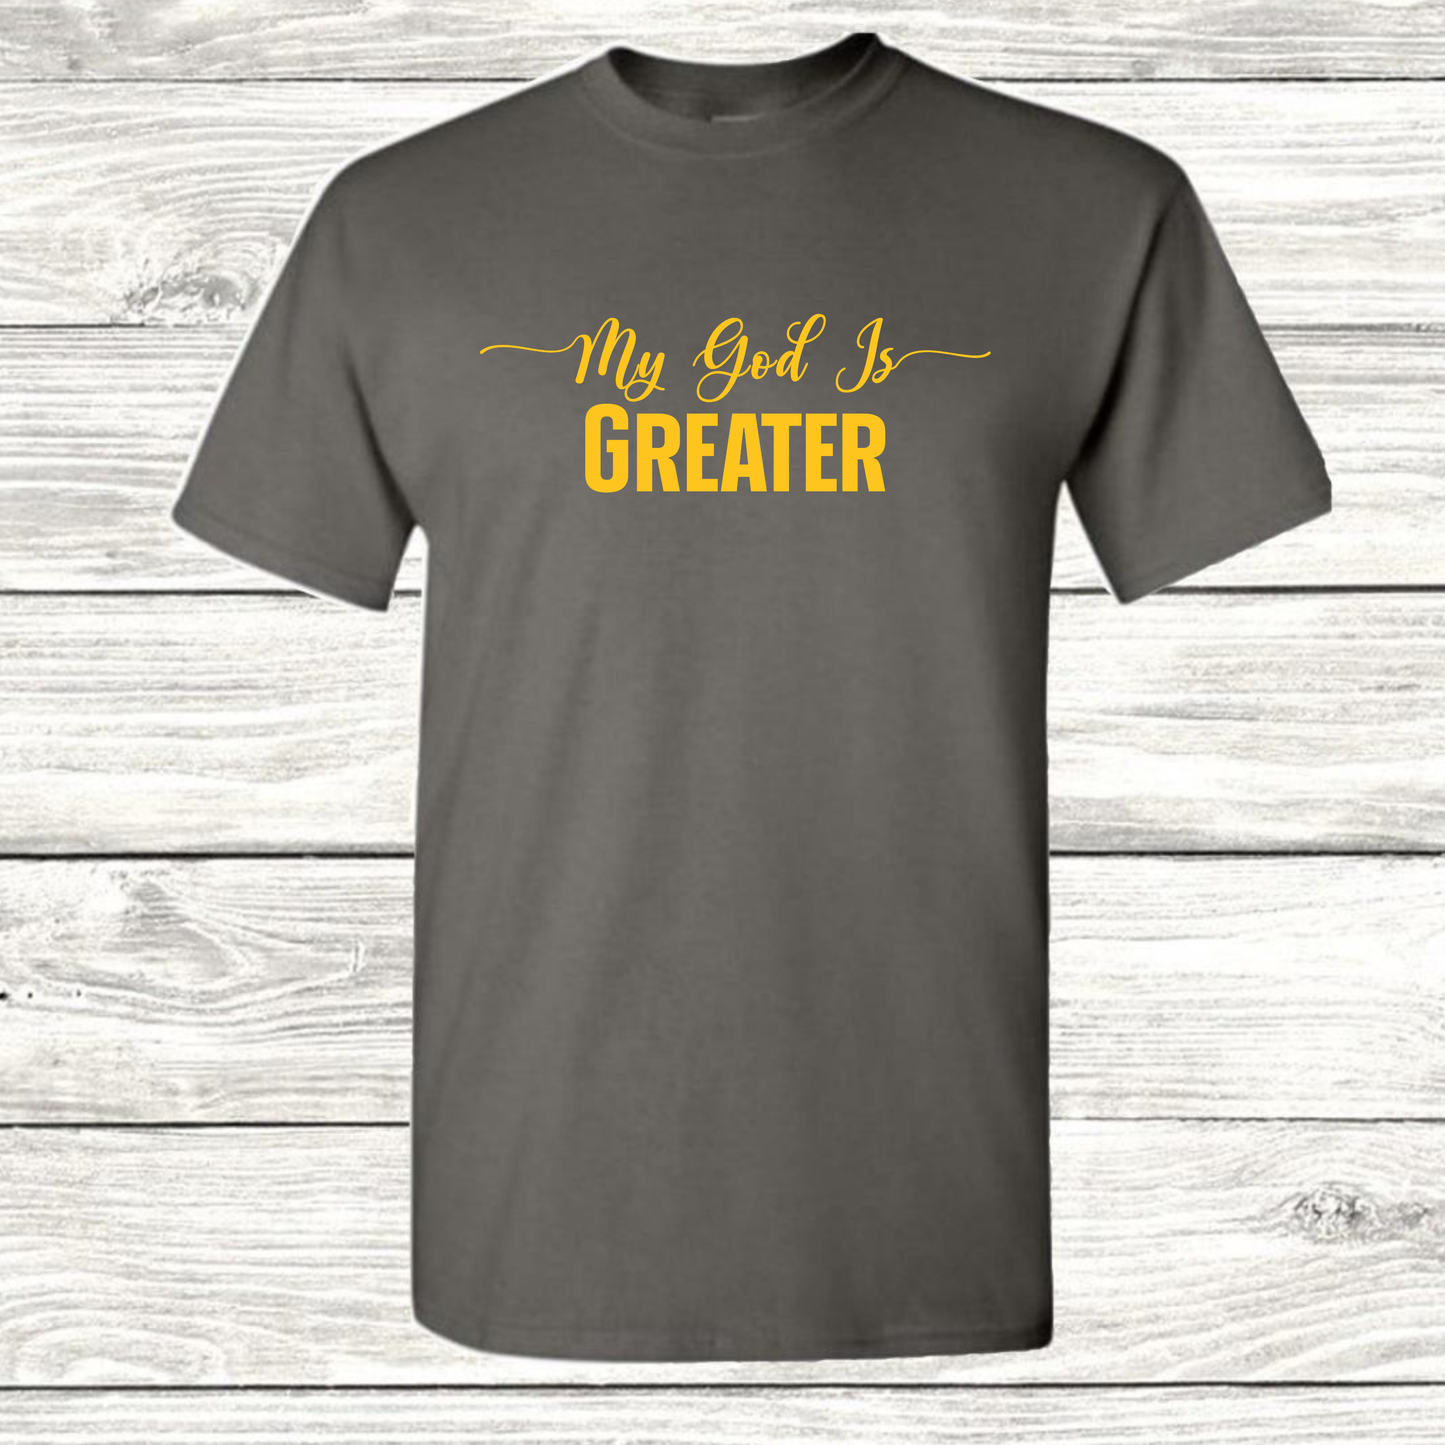 My God is Greater T-Shirt